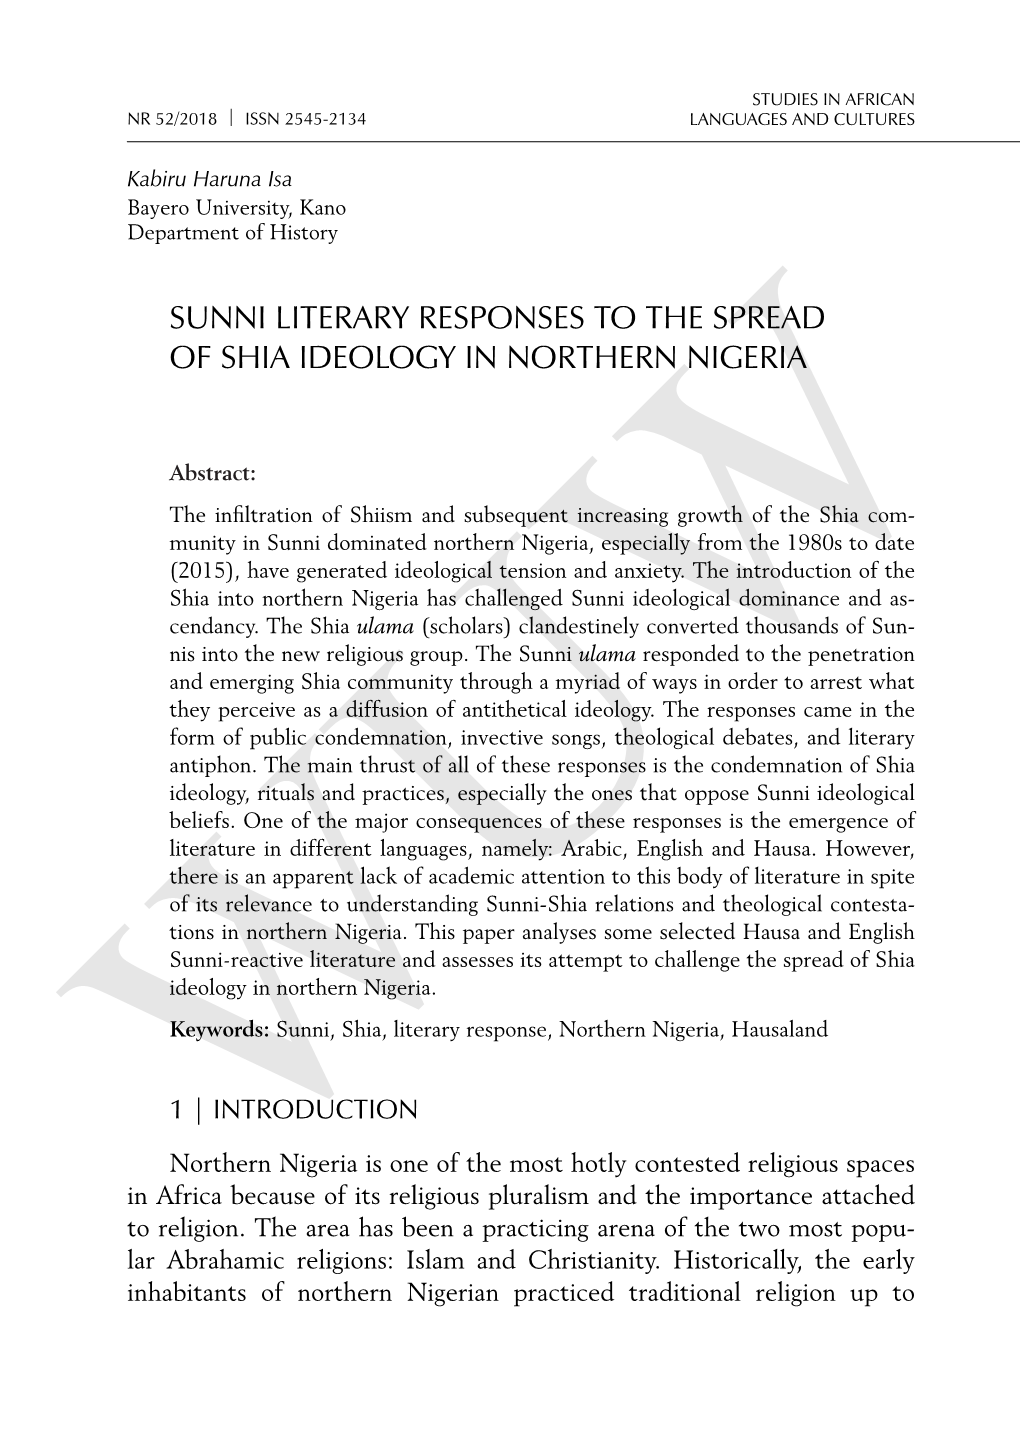 Sunni Literary Responses to the Spread of Shia Ideology in Northern Nigeria